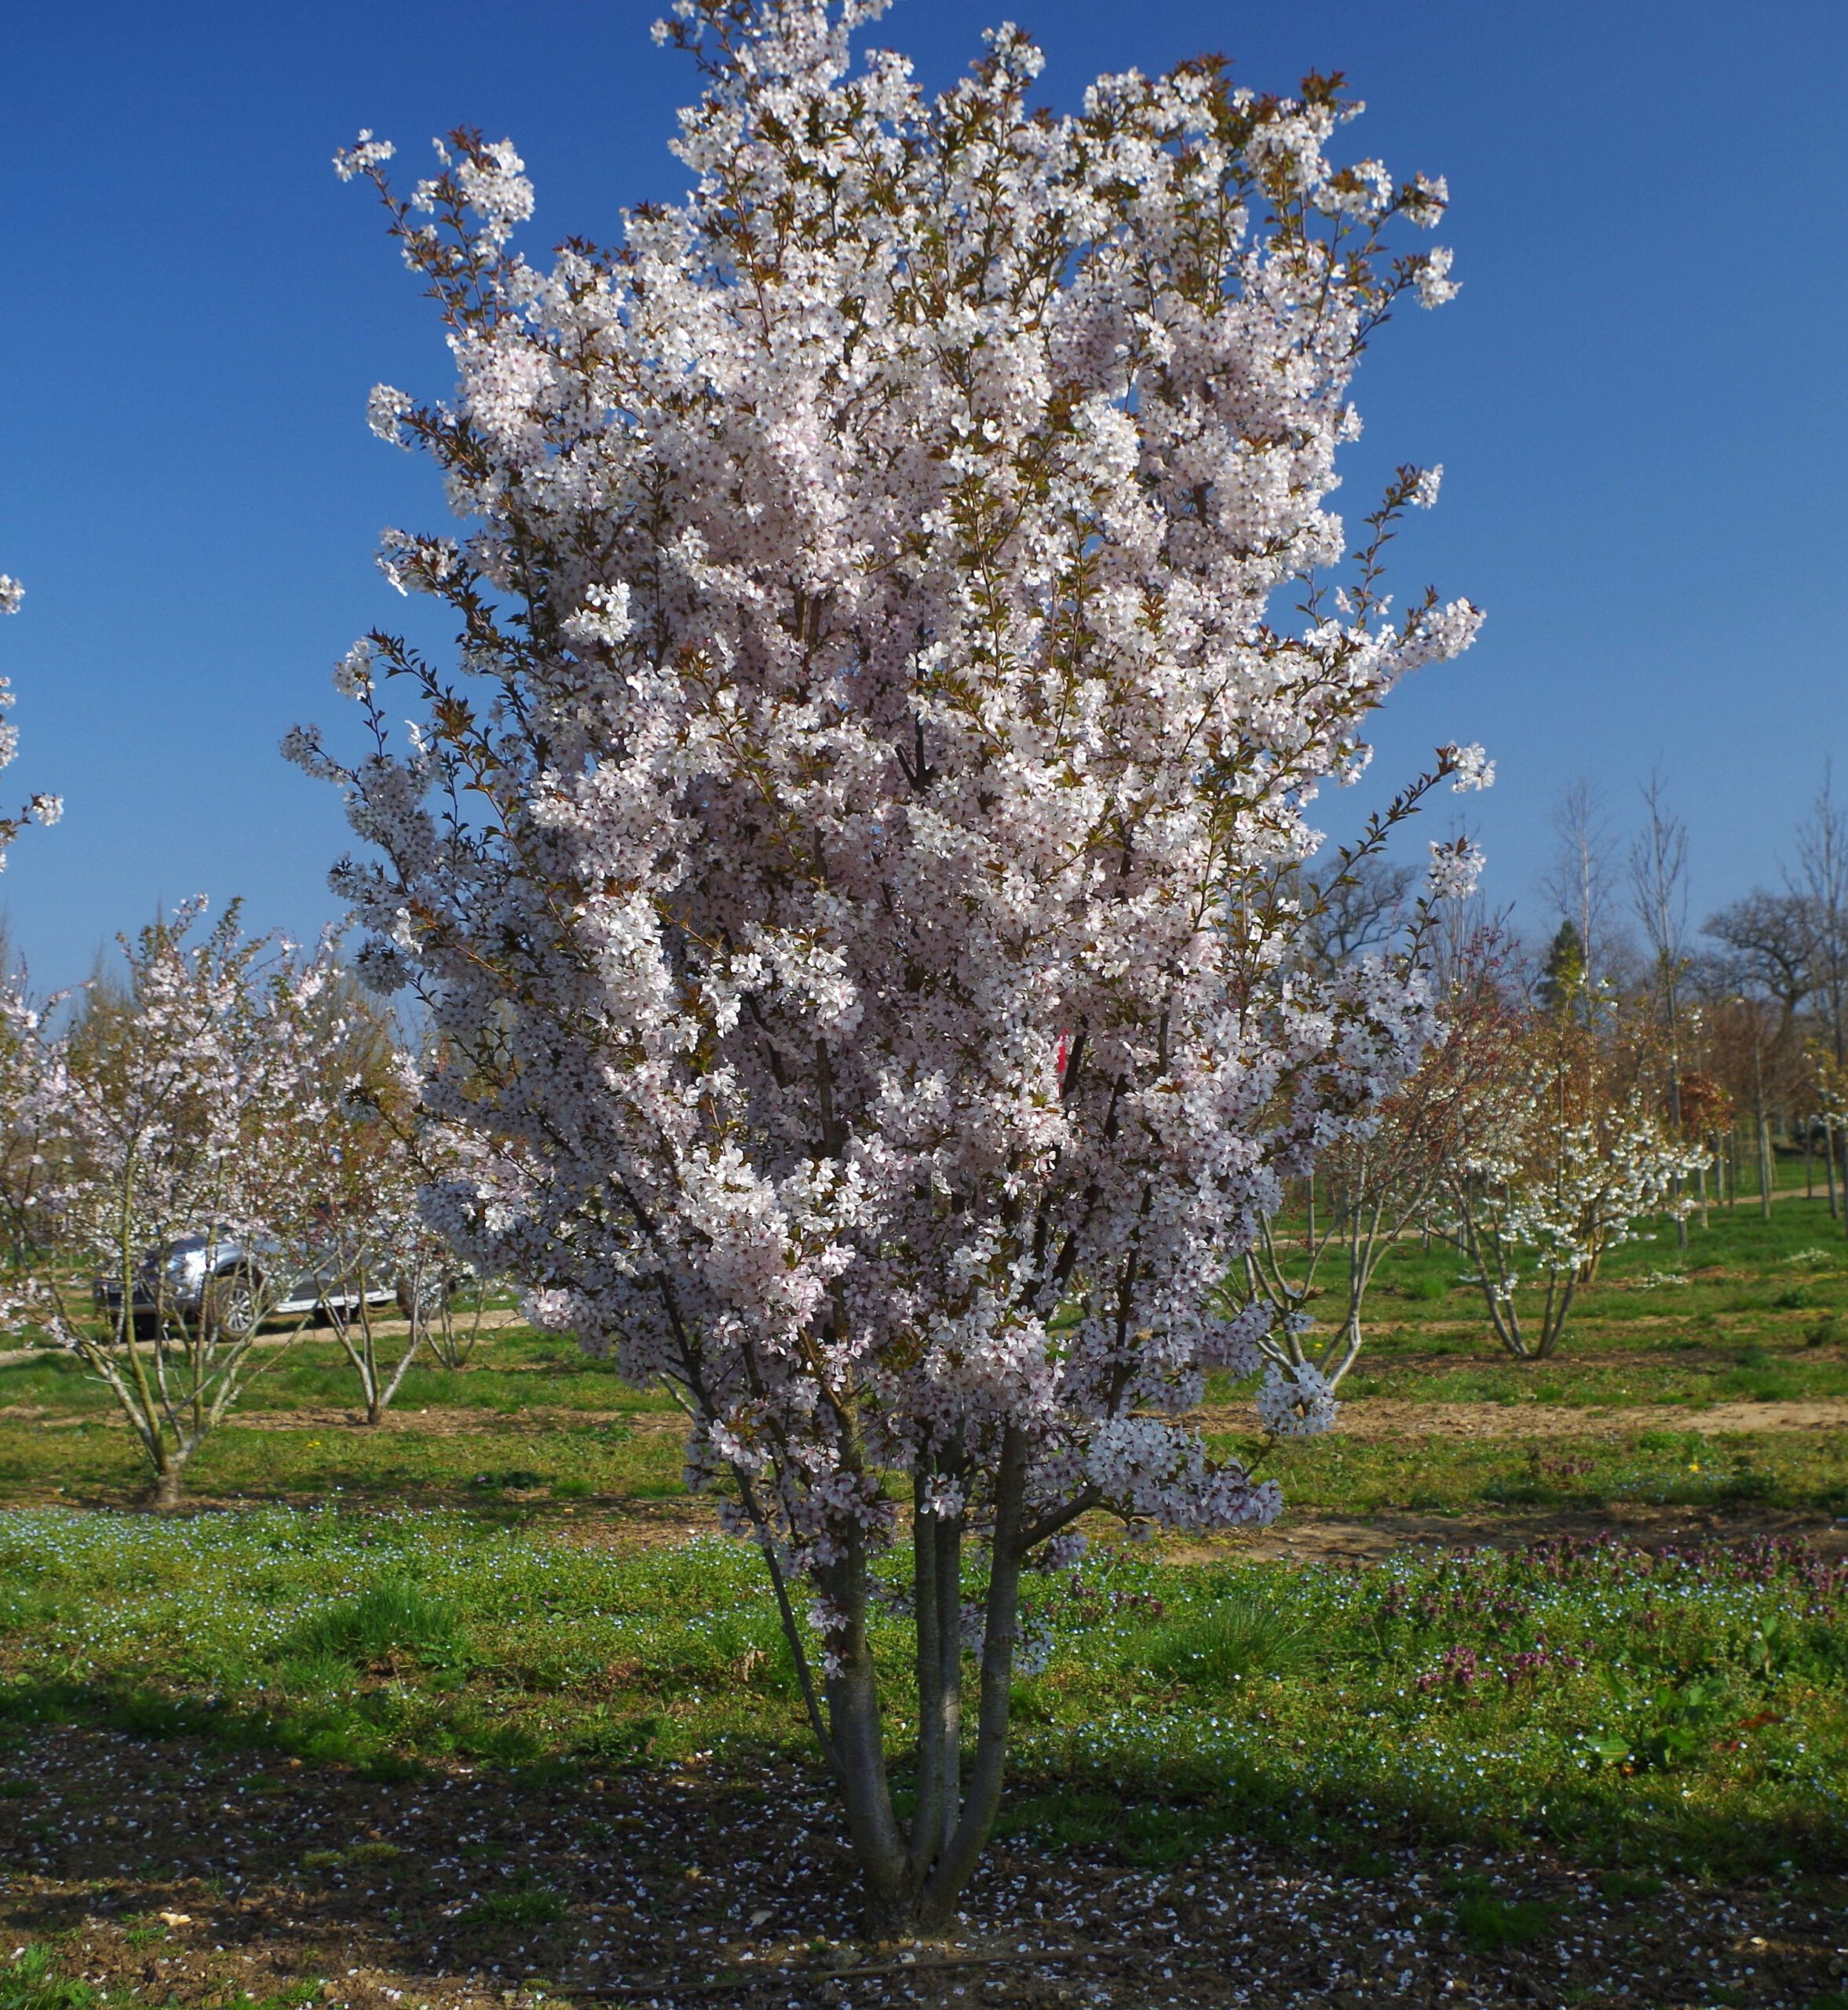 Prunus Pandora multi stem tree growing in a field with pink flower blossoms and blue sky